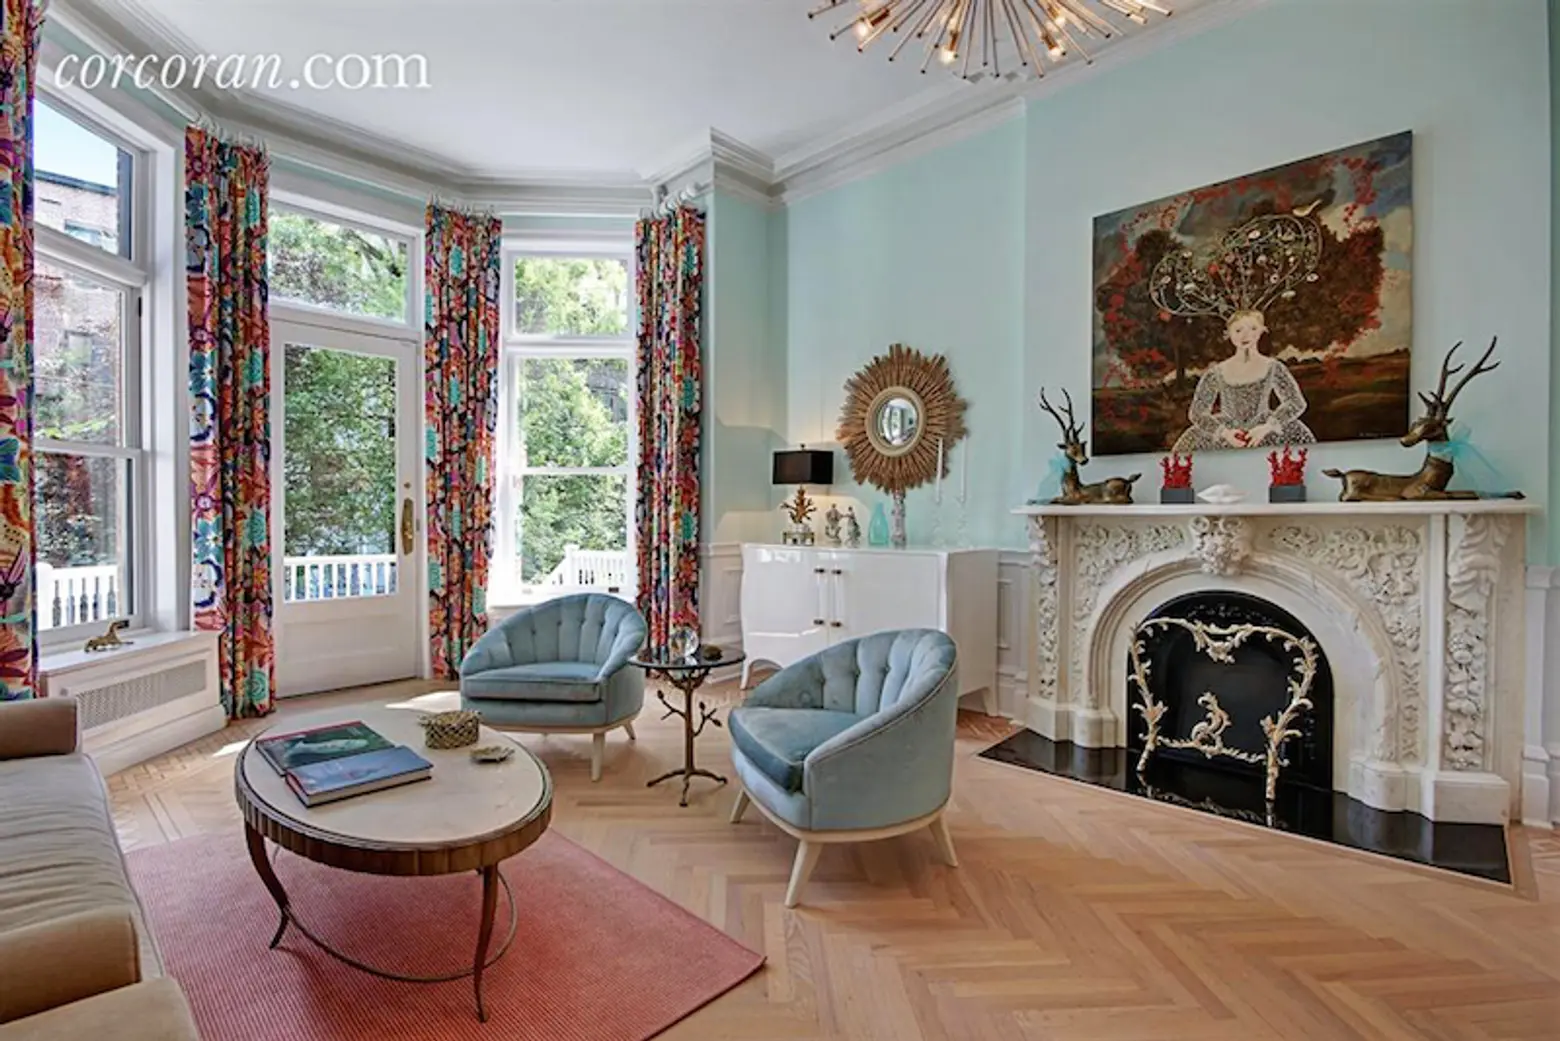 Five-Story Brooklyn Townhouse Makes the Best-Dressed List in Pretty Pastels and Contemporary Flair